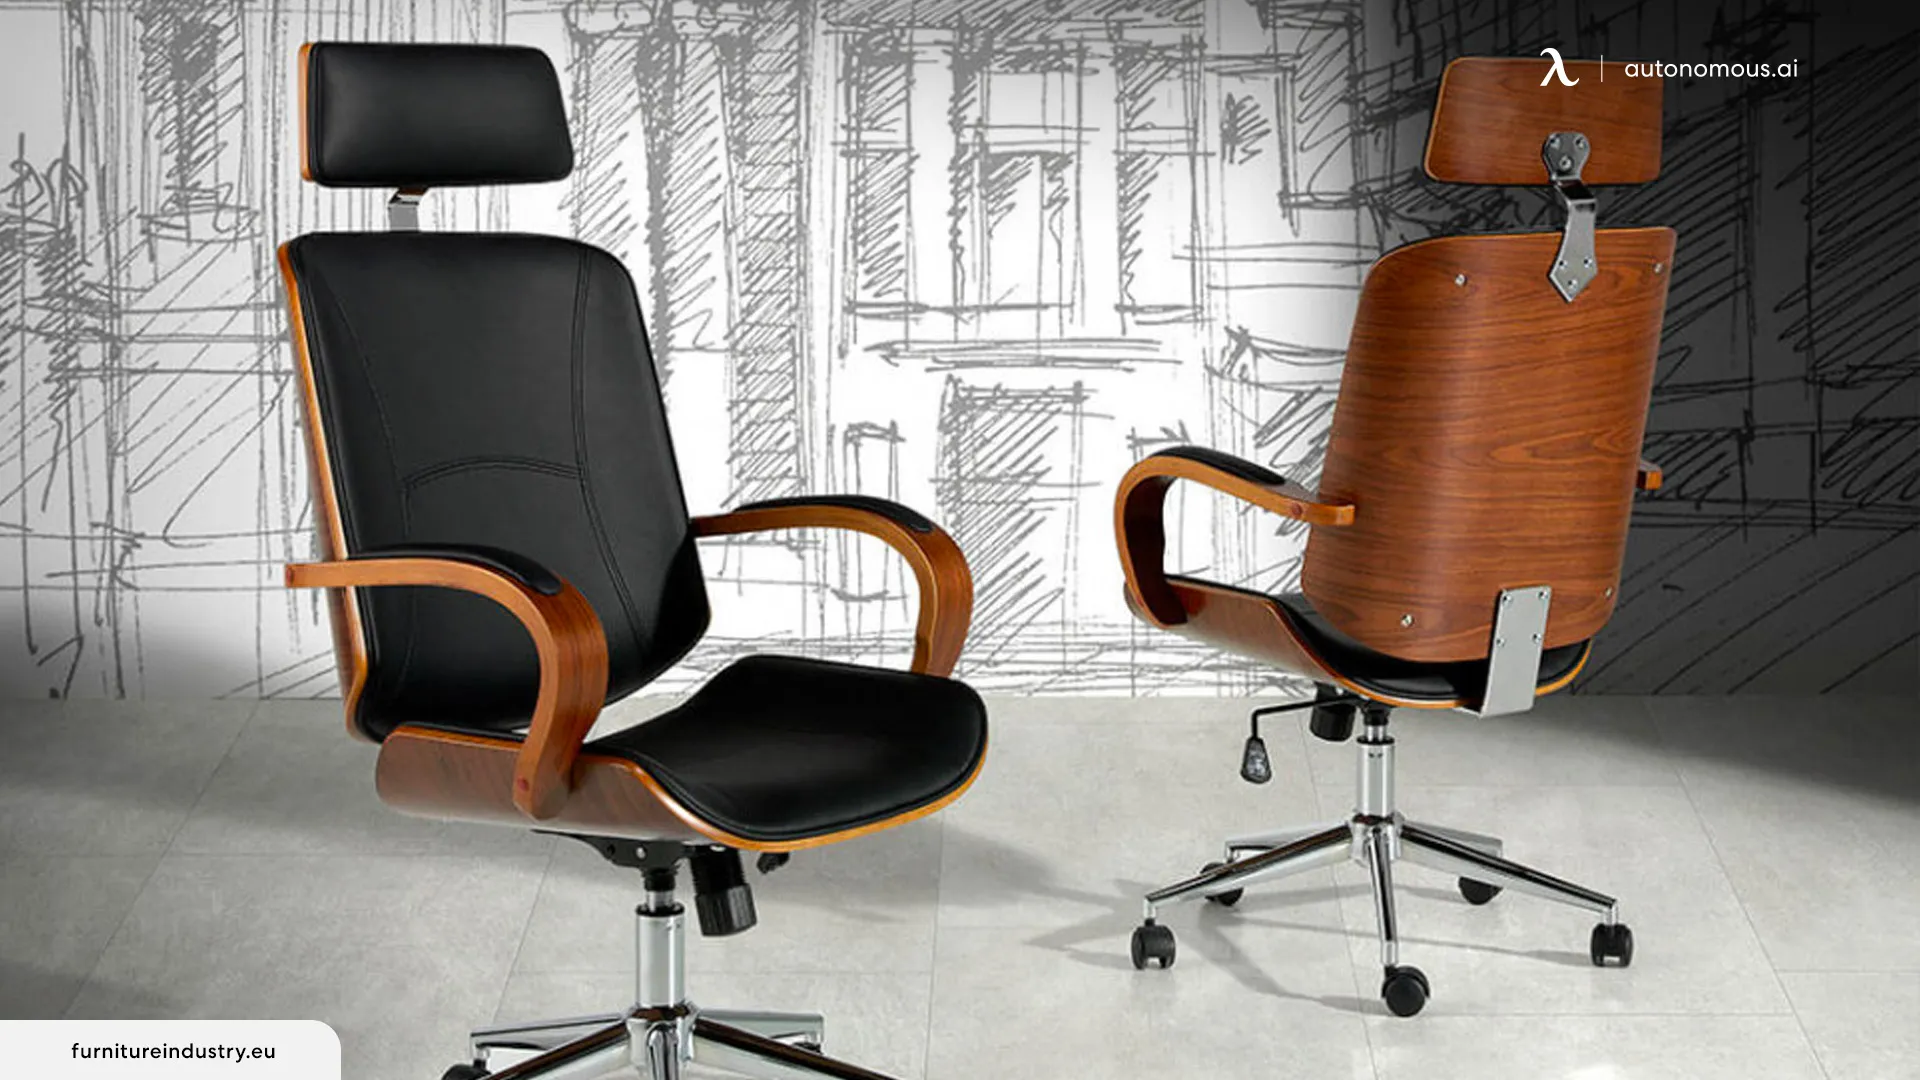 How to Choose Leather Office Chair for Executive Workspace?